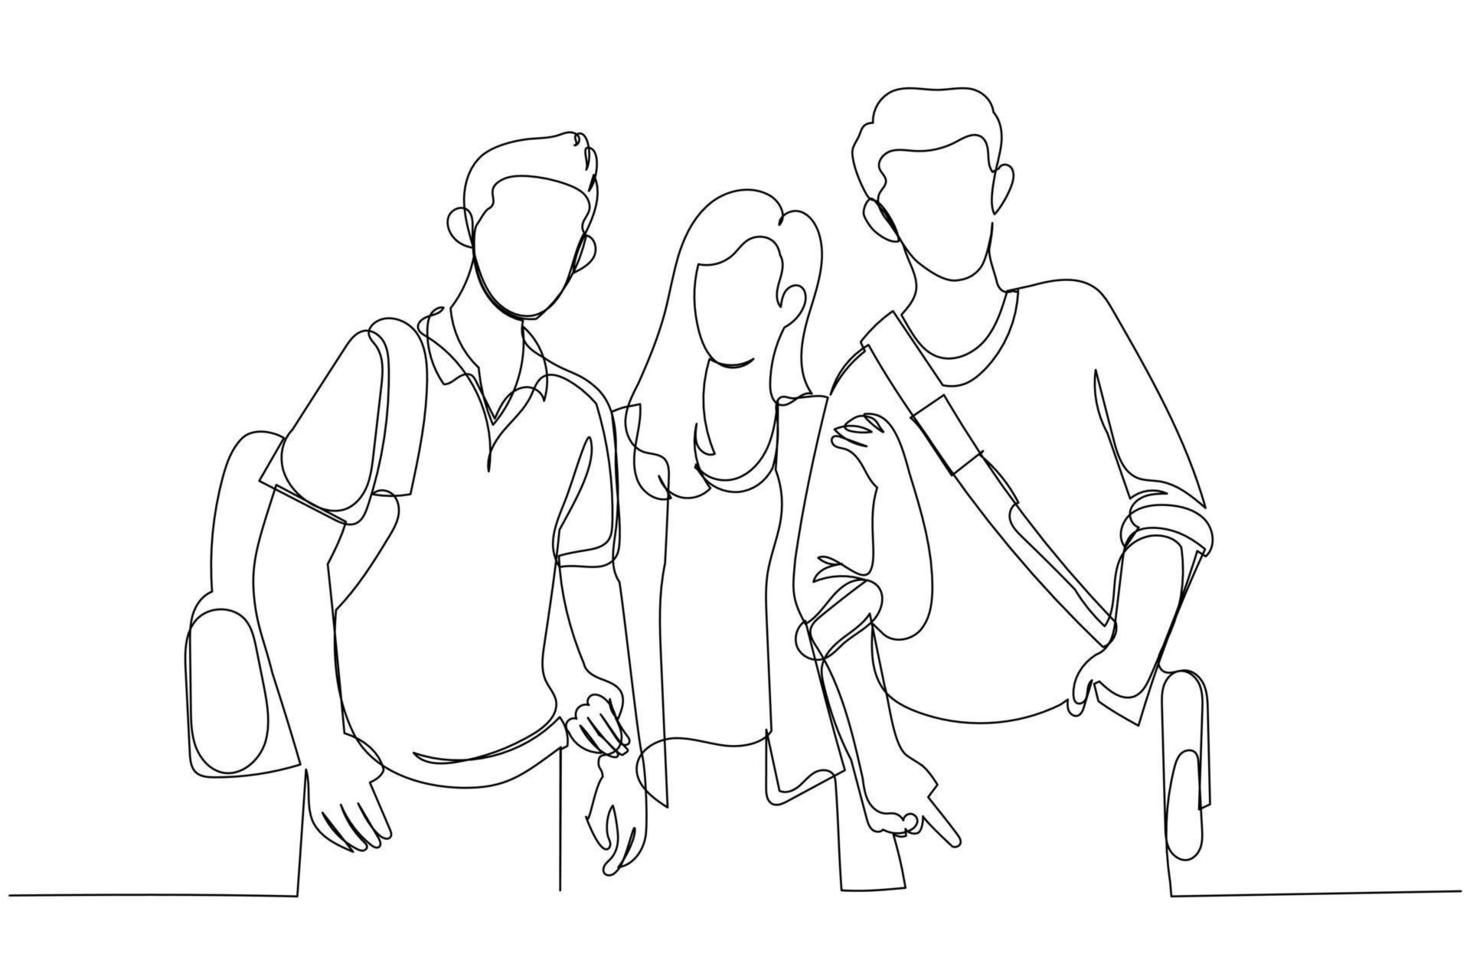 Illustration of males and female students standing posing looking to camera. Single line art style vector